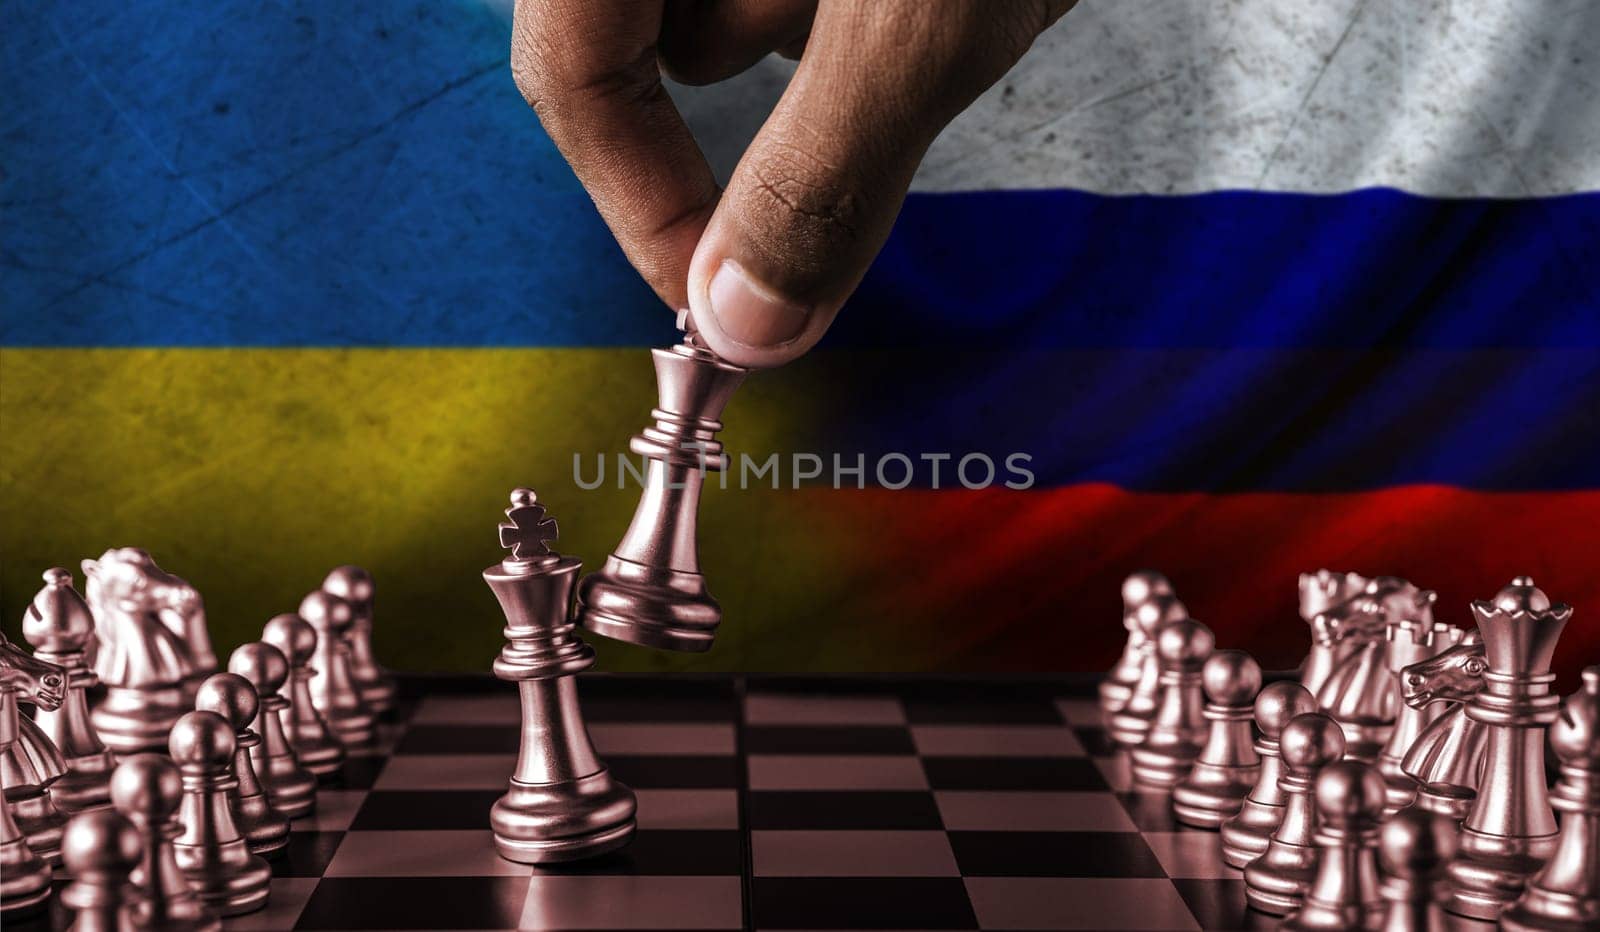 Russia vs Ukraine flag concept on chessboard. Political tension between Russia and Ukraine. Conflict between Russia and Ukraine over chess pieces